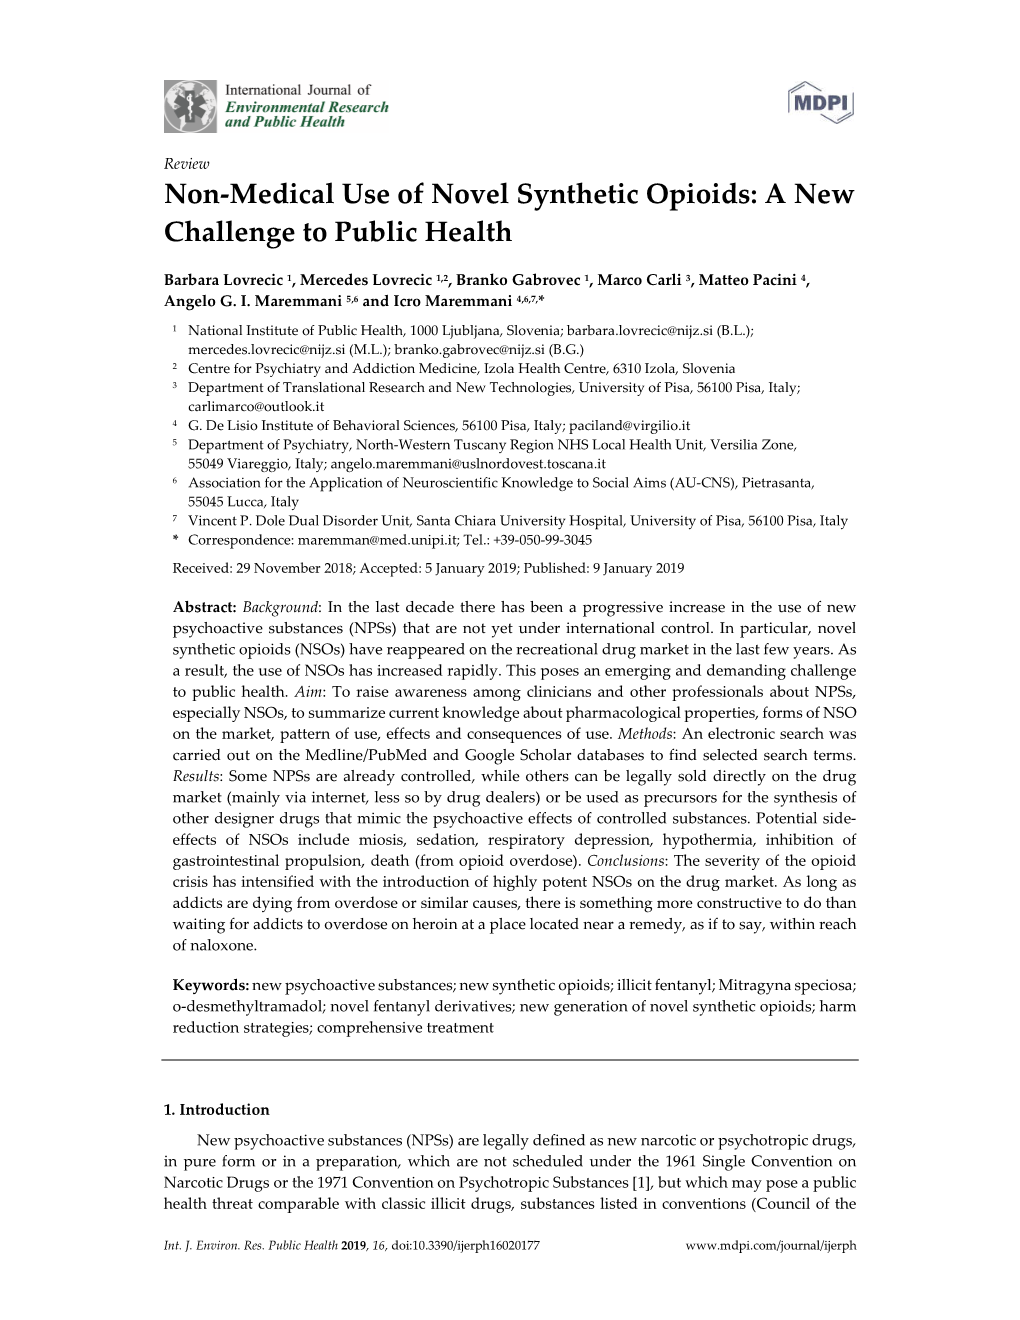 Non-Medical Use of Novel Synthetic Opioids: a New Challenge to Public Health